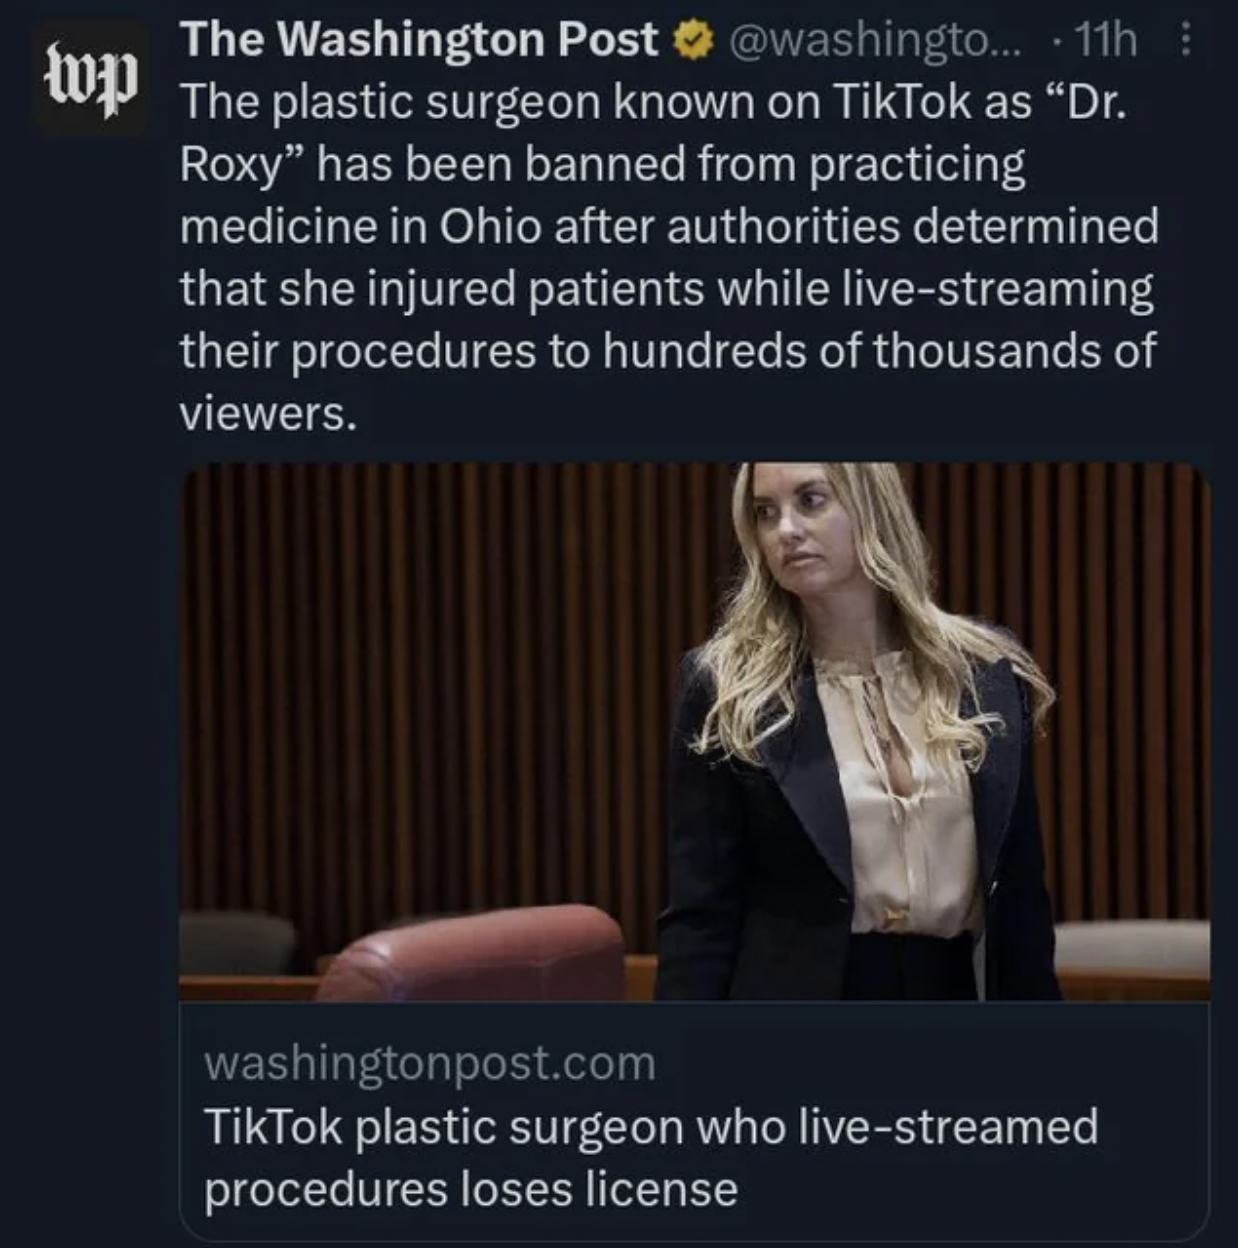 presentation - The Washington Post ... 11h The plastic surgeon known on TikTok as "Dr. Roxy" has been banned from practicing medicine in Ohio after authorities determined that she injured patients while livestreaming their procedures to hundreds of thousa